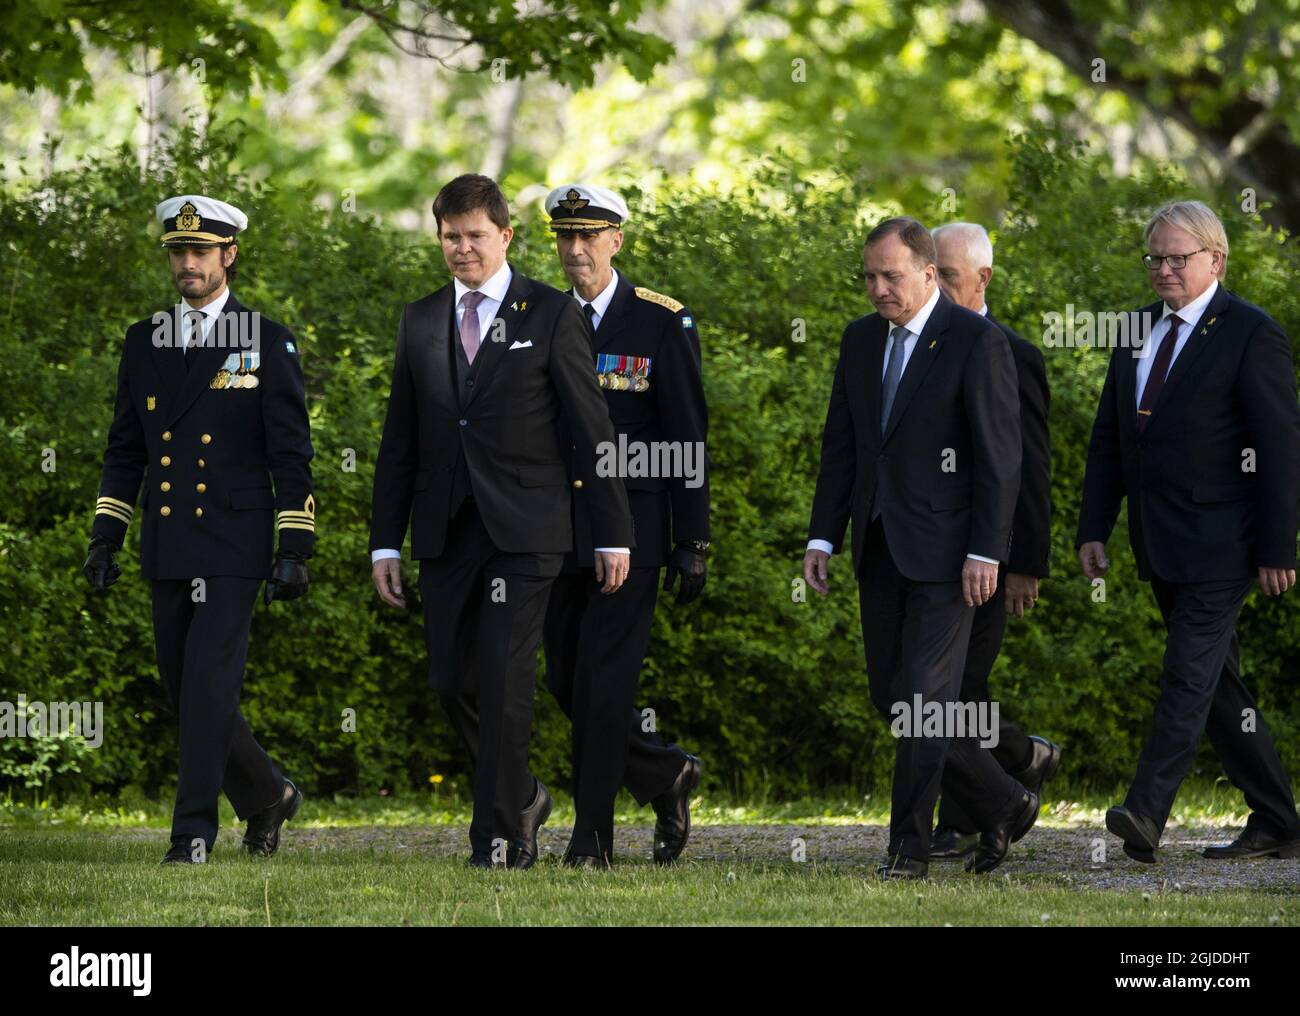 Prince Carl Philip, Andreas Norlén, Speaker of the Parliament, General Micael Bydén, Prime Minister Stefan Lofven, Sverker Goranson, chairman of the Swedish Veterans Association, and Peter Hultqvist, Minister for Defence, during Sweden's Veterans Day at the Kungsangen regiment in Stockholm, Sweden, May 29, 2020. Photo: Pontus Lundahl / TT / code 10050  Stock Photo